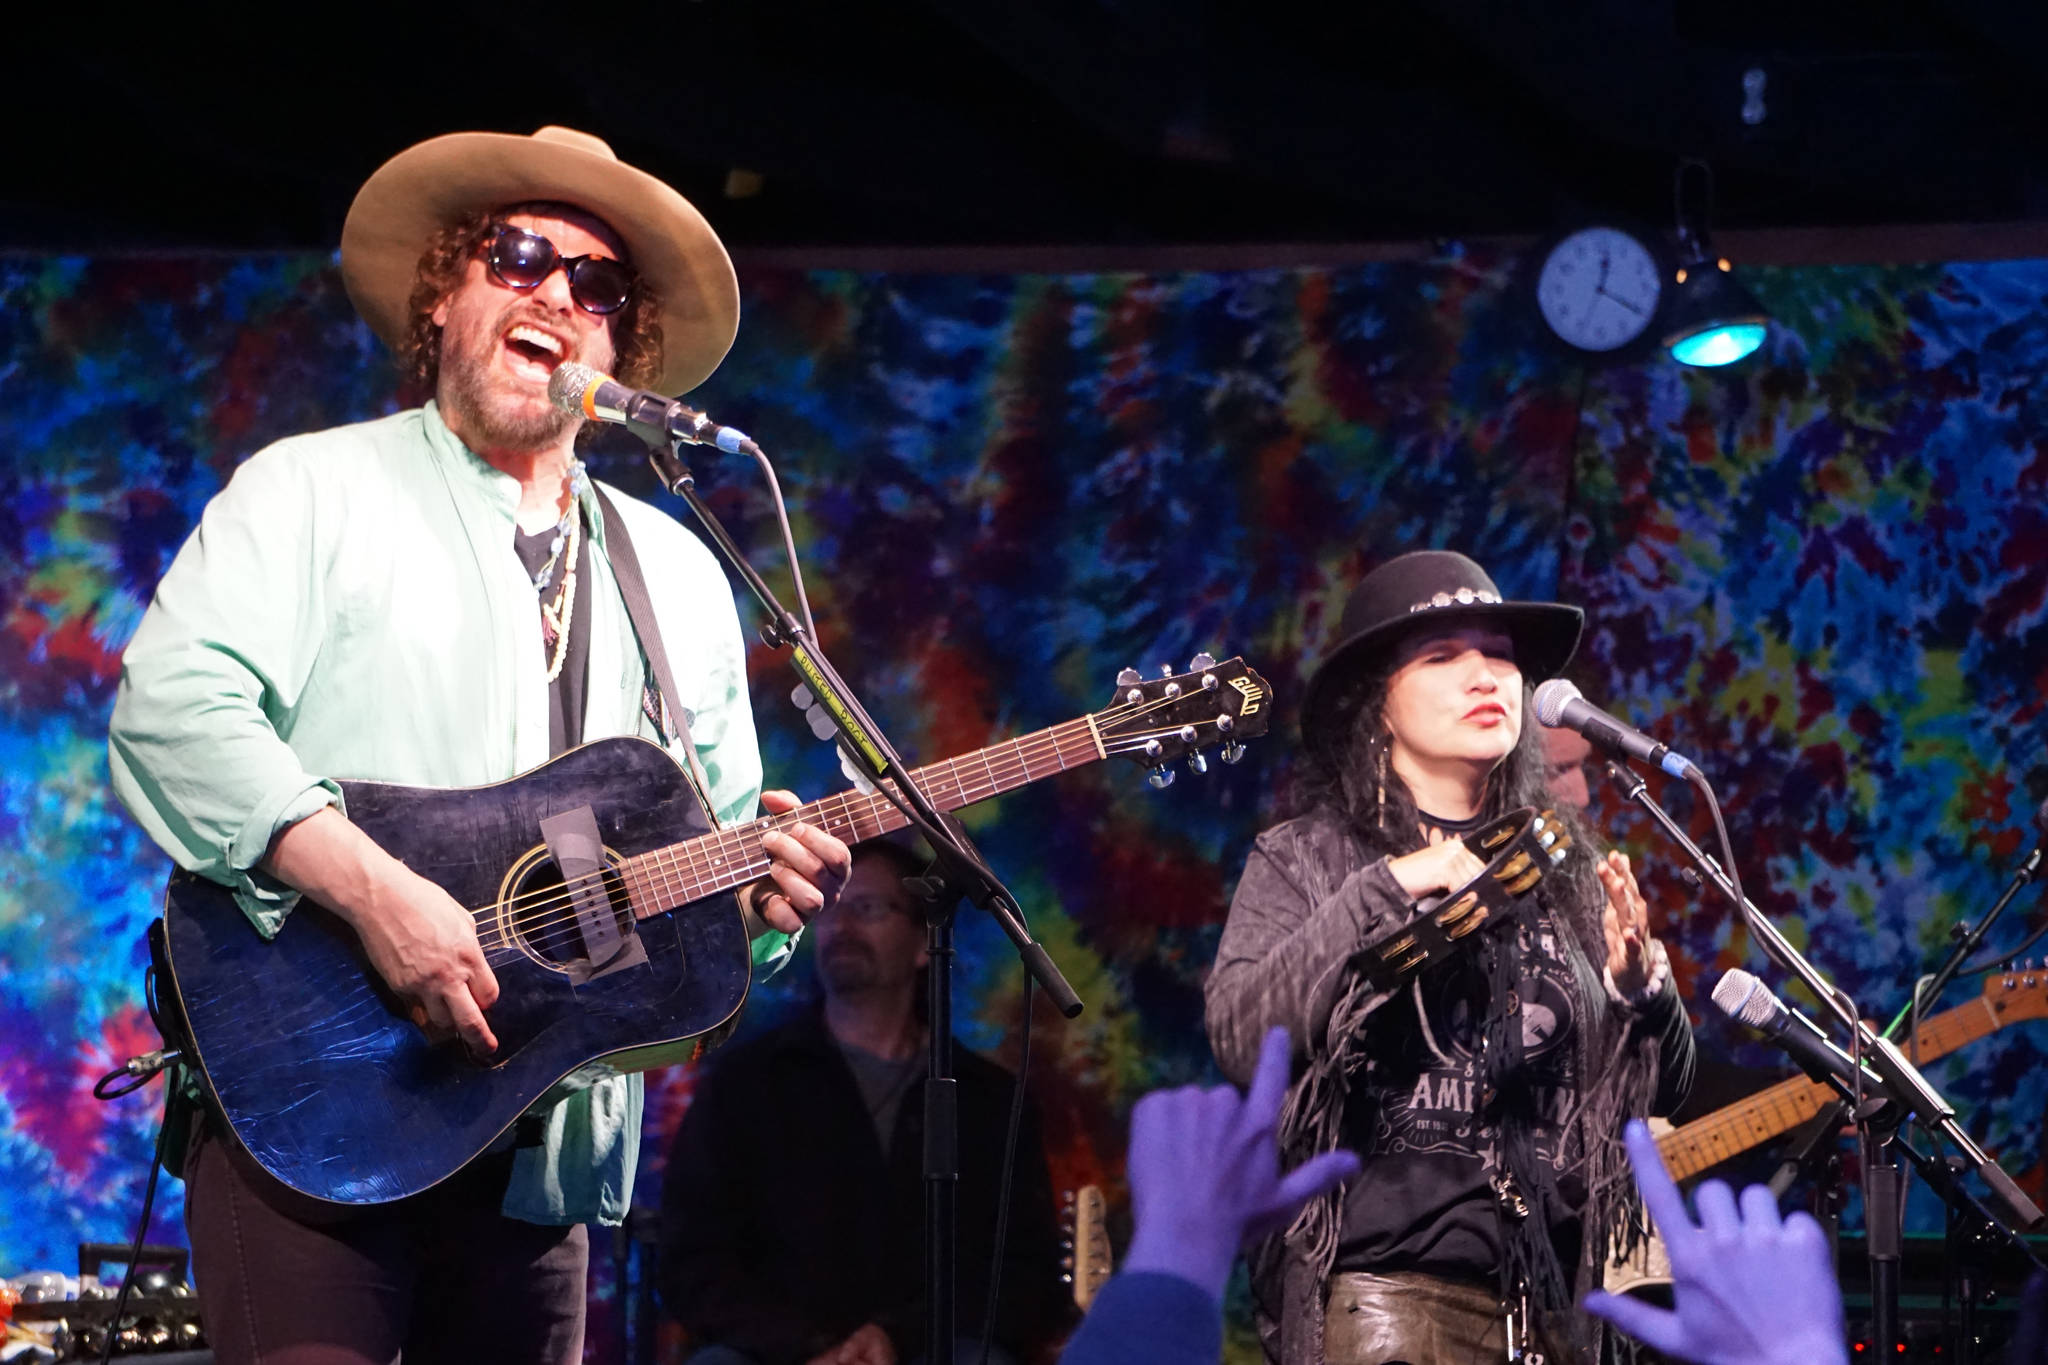 Michael Glabicki, left, and Liz Berlin of Rusted Root perform on Saturday night, Aug. 5, 2017, at Salmonfest, Ninilchik, Alaska. (Photo by Michael Armstrong, Homer News)